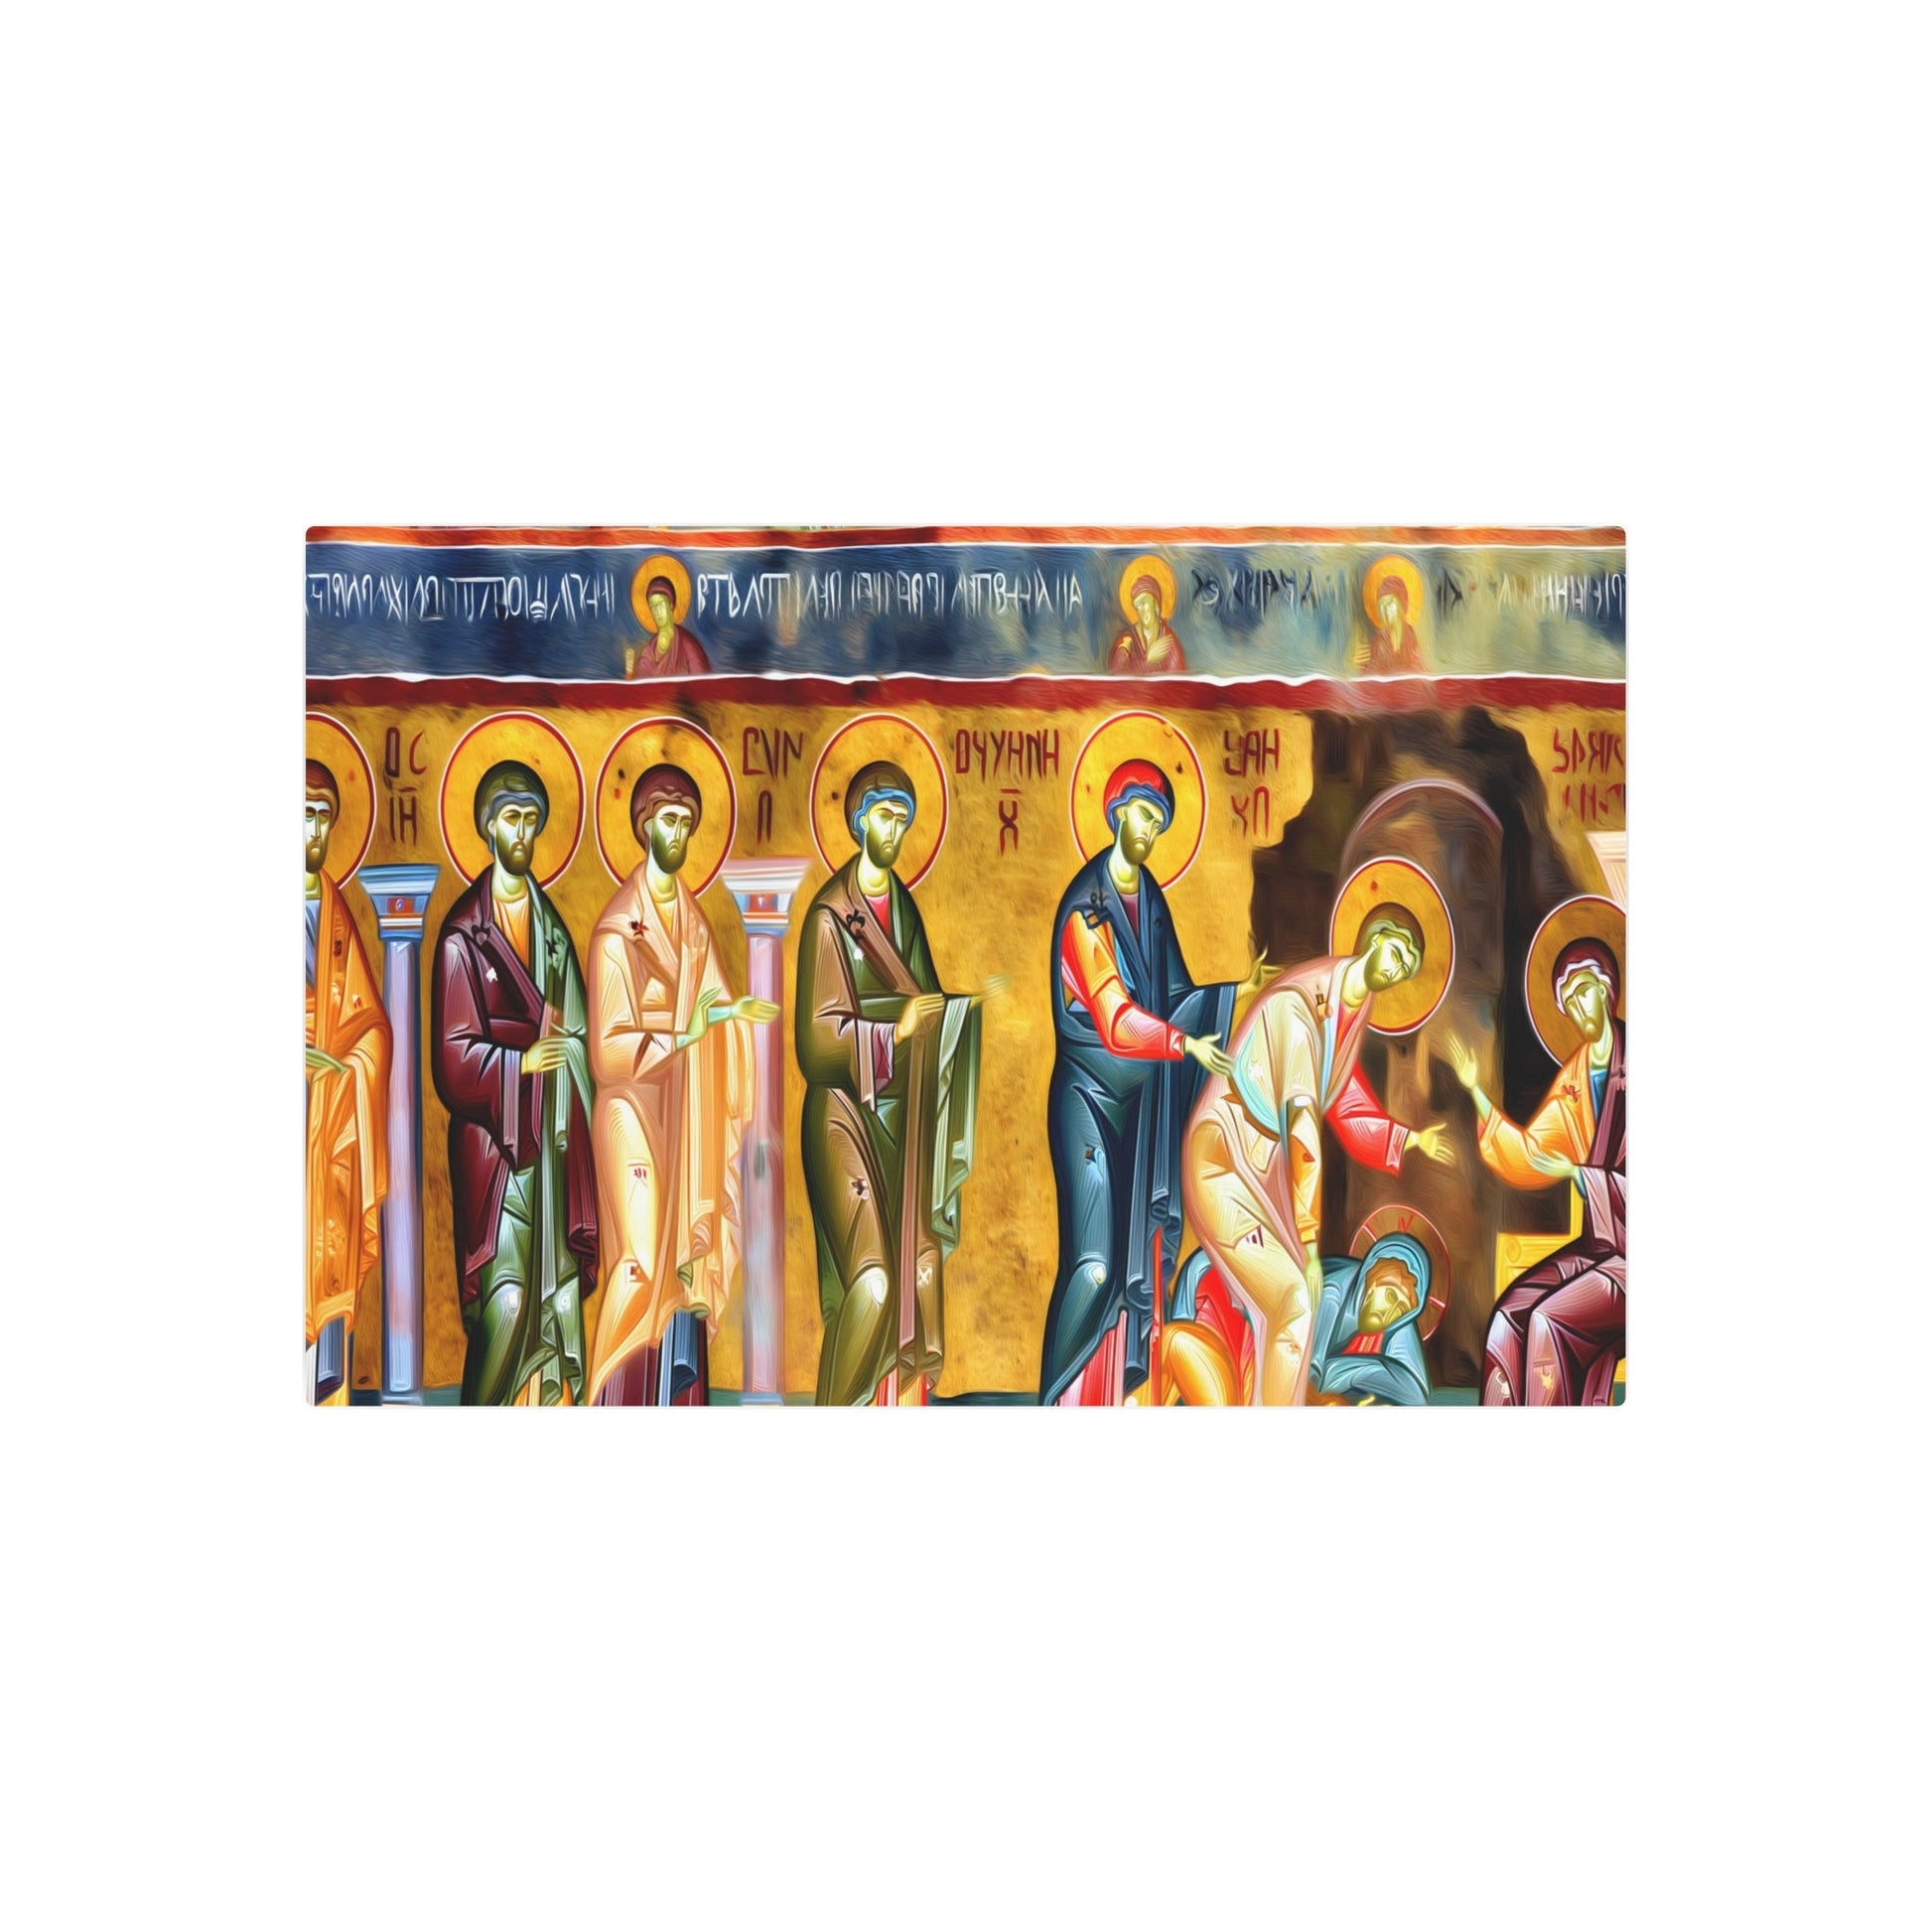 Metal Poster Art | "Prominent Byzantine Art Style Detailed Image: Non-Western & Global Styles Featuring Flat Frontal Figures, Use of Gold, Elaborate Background - Metal Poster Art 36″ x 24″ (Horizontal) 0.12''